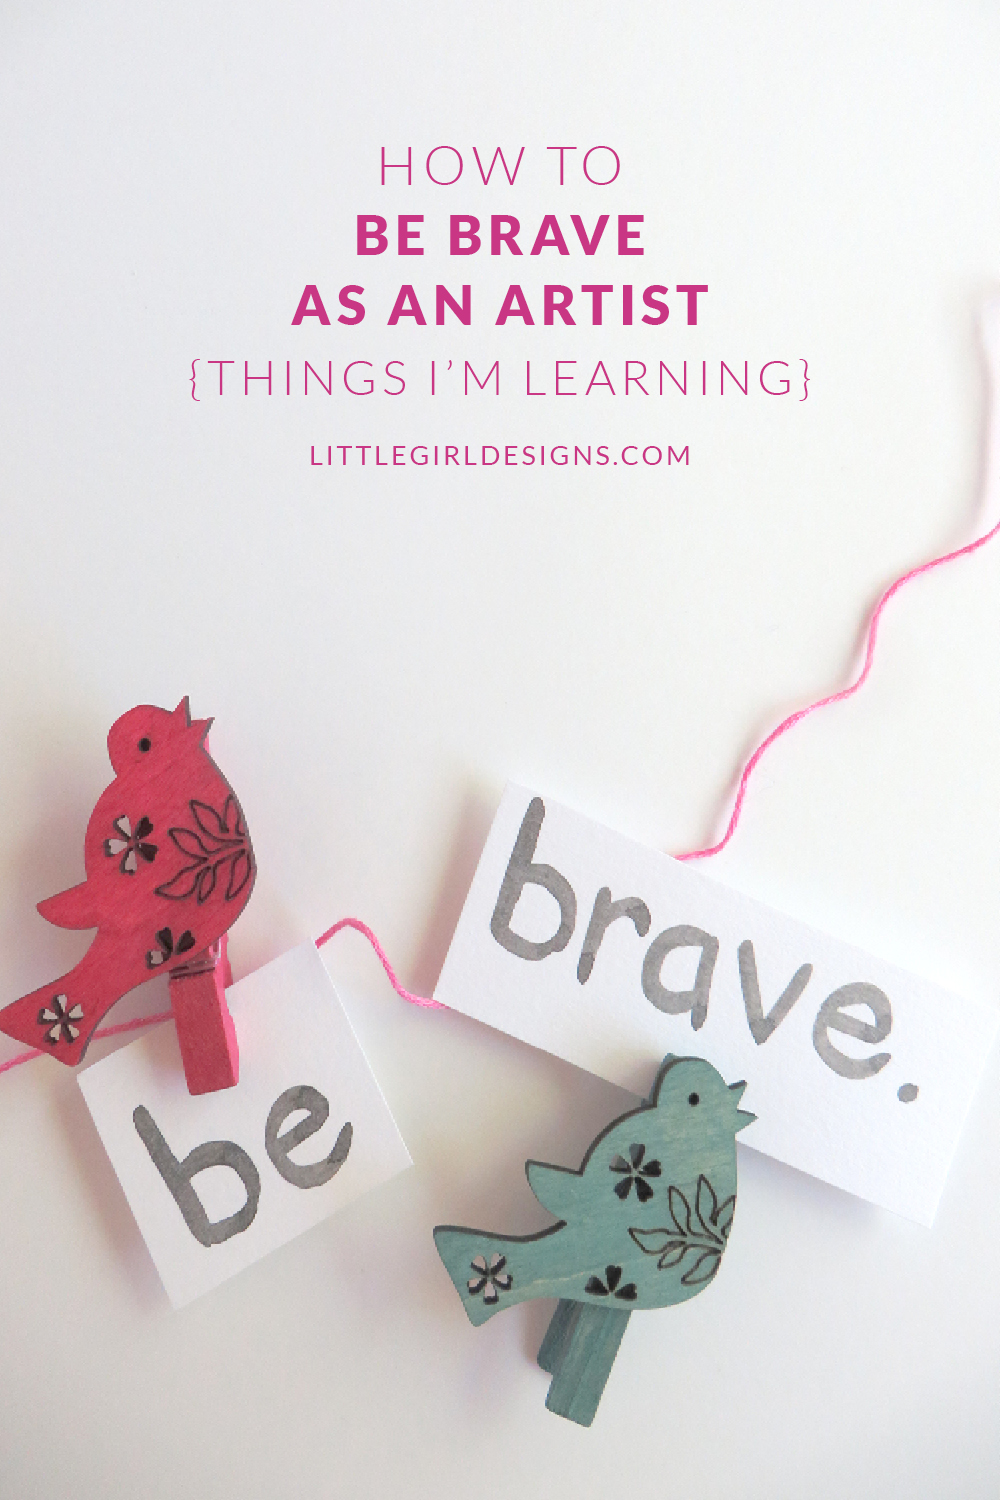 How to Be Brave as an Artist - it takes courage to follow your creative dreams and to share your work with others. I'm sharing some tips that I've learned (and am learning) in growing in courage as an artist. @littlegirldesigns.com